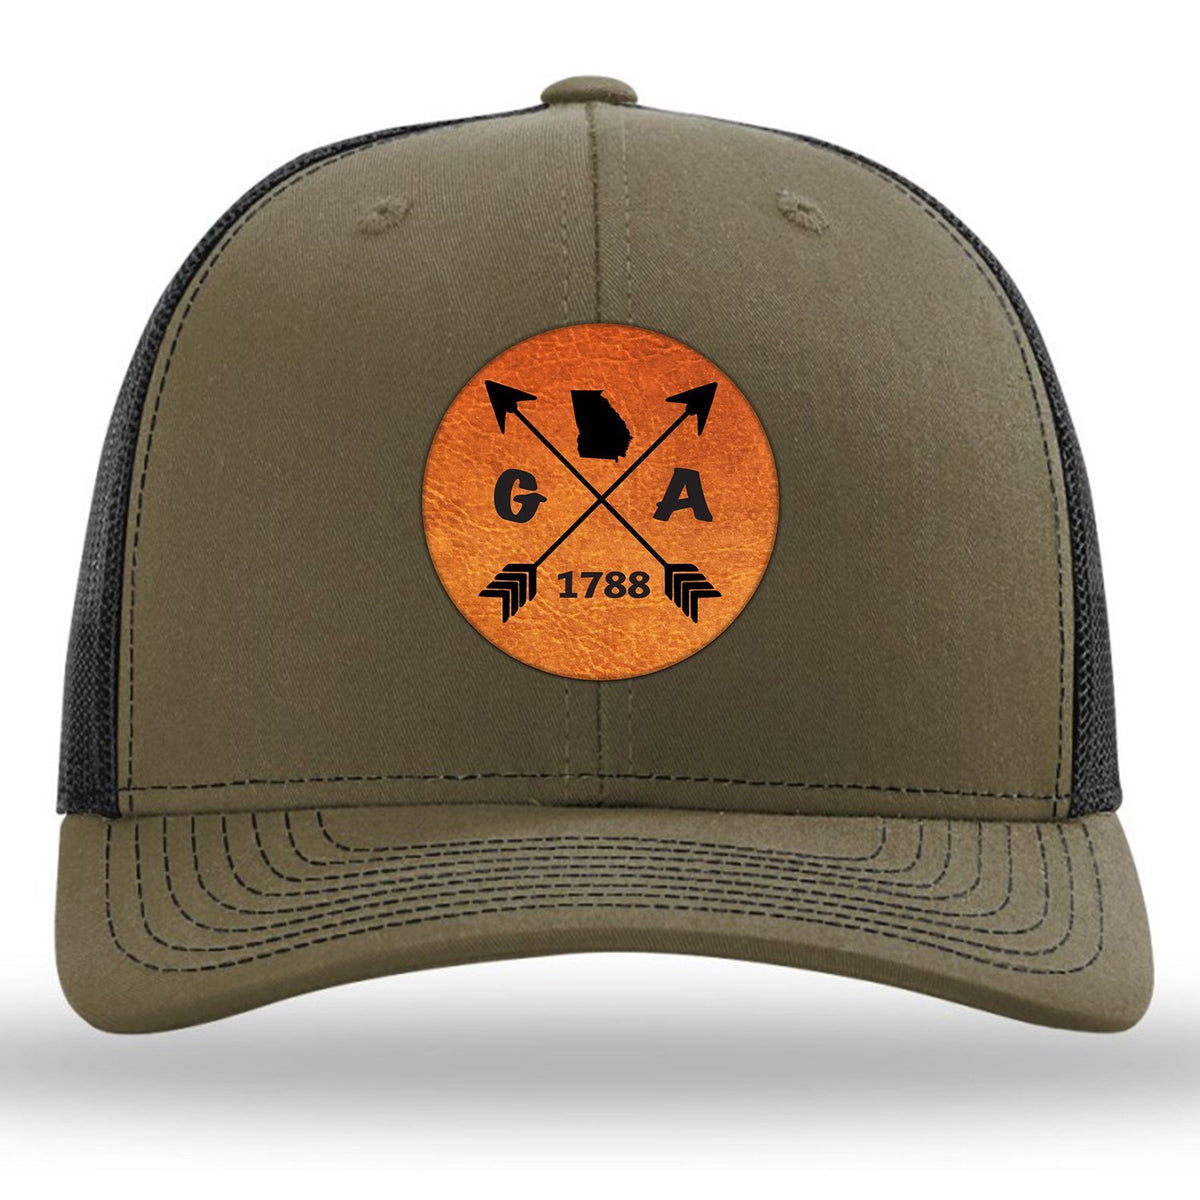 Georgia State Arrows - Leather Patch Trucker Hat